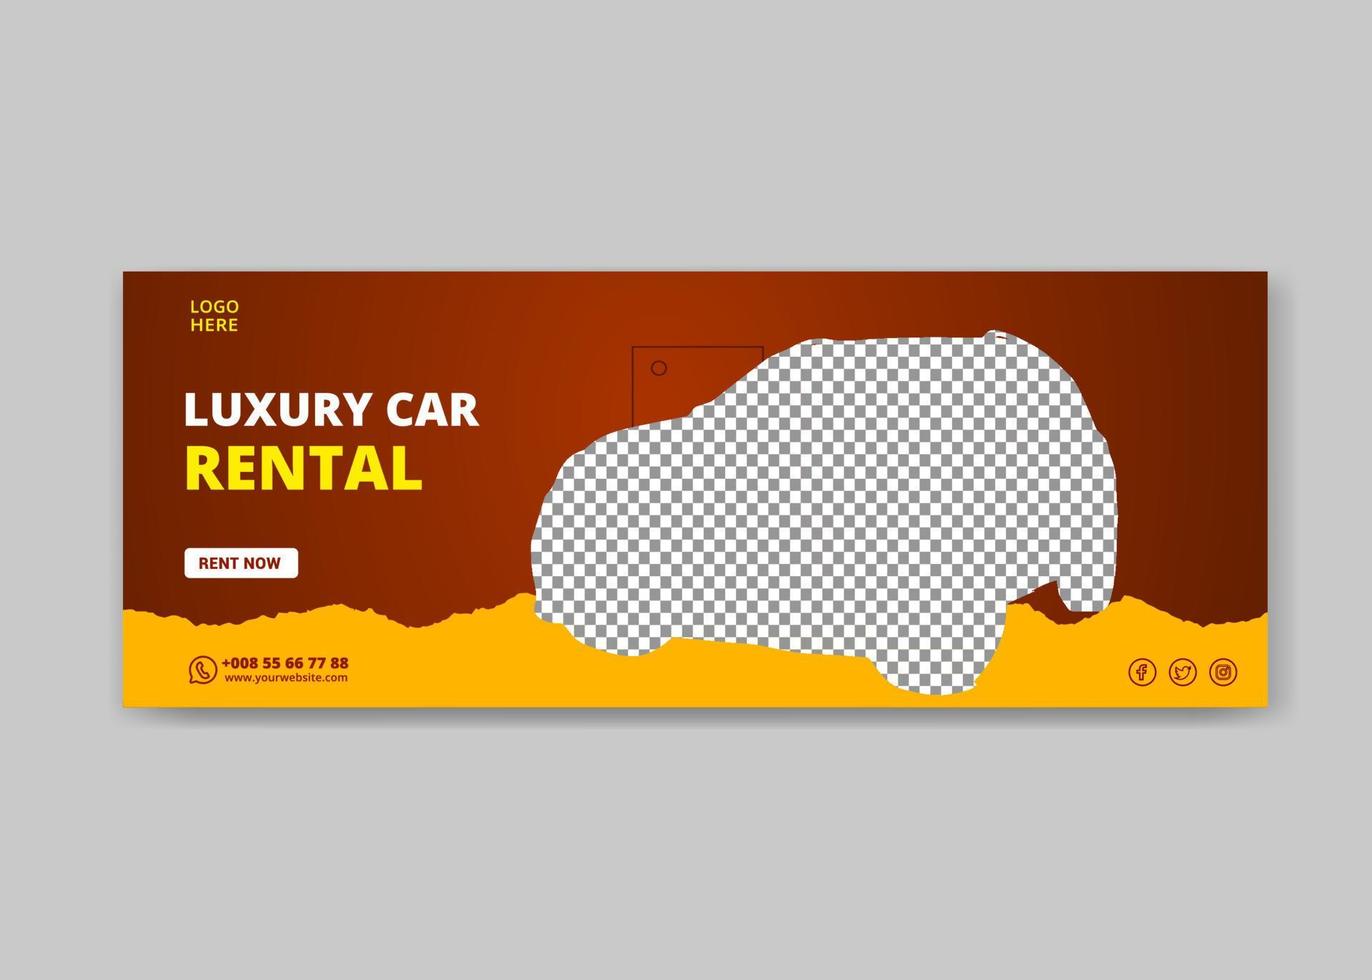 Car rental social media cover and banner design, Car rental social media post template, social media post template vector